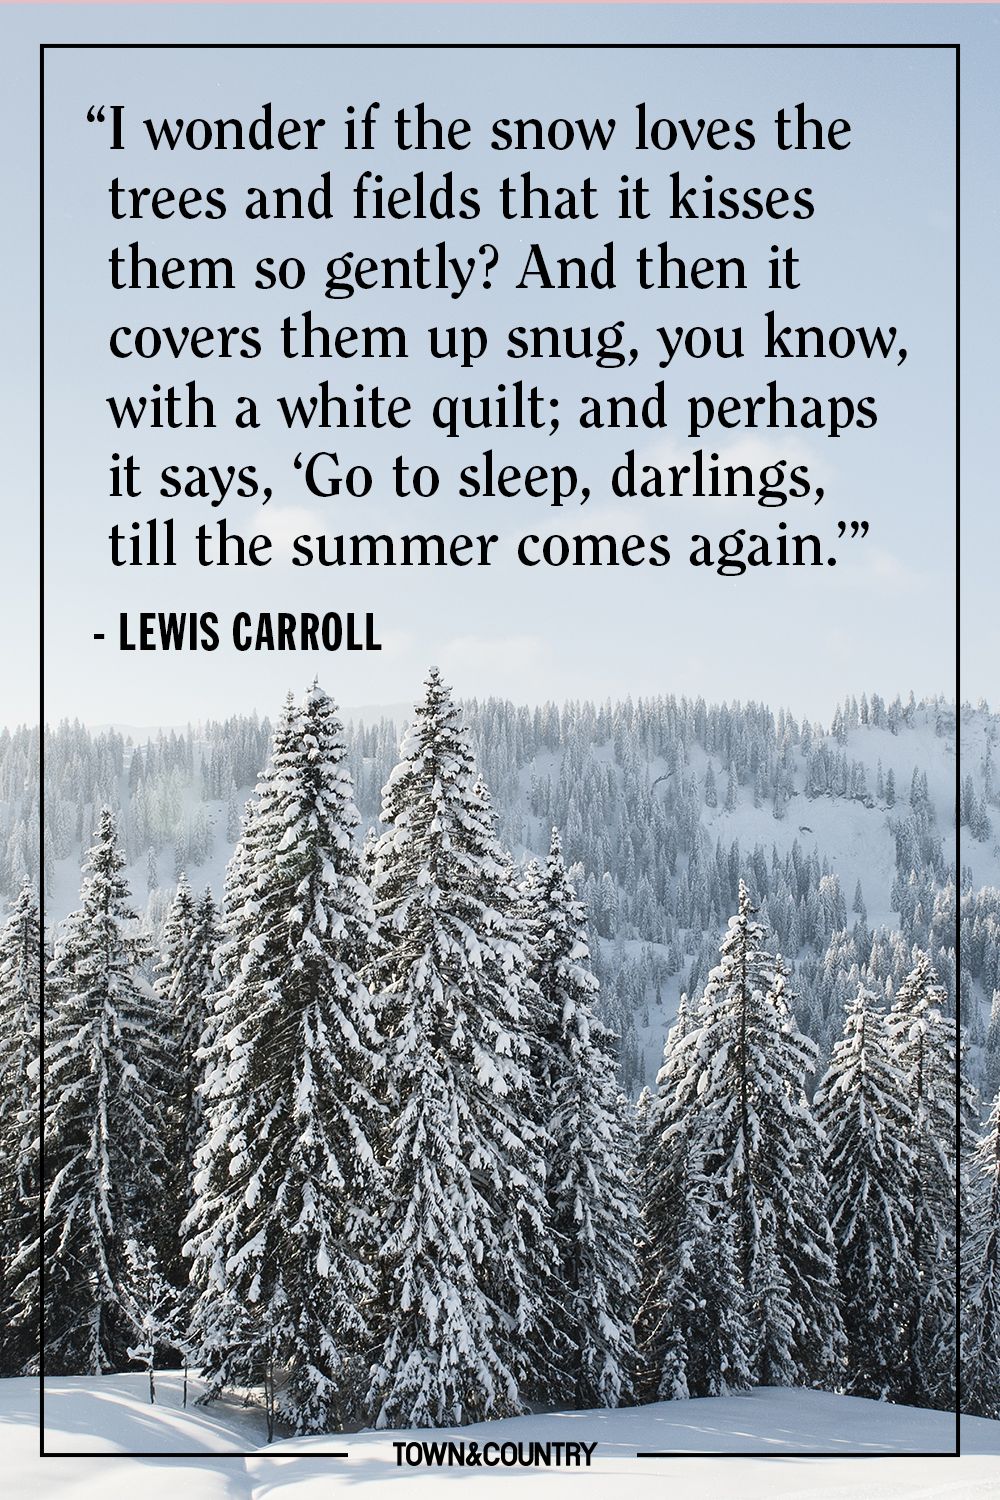 35 Best Winter Quotes - Cute Sayings About Snow & The Winter ...